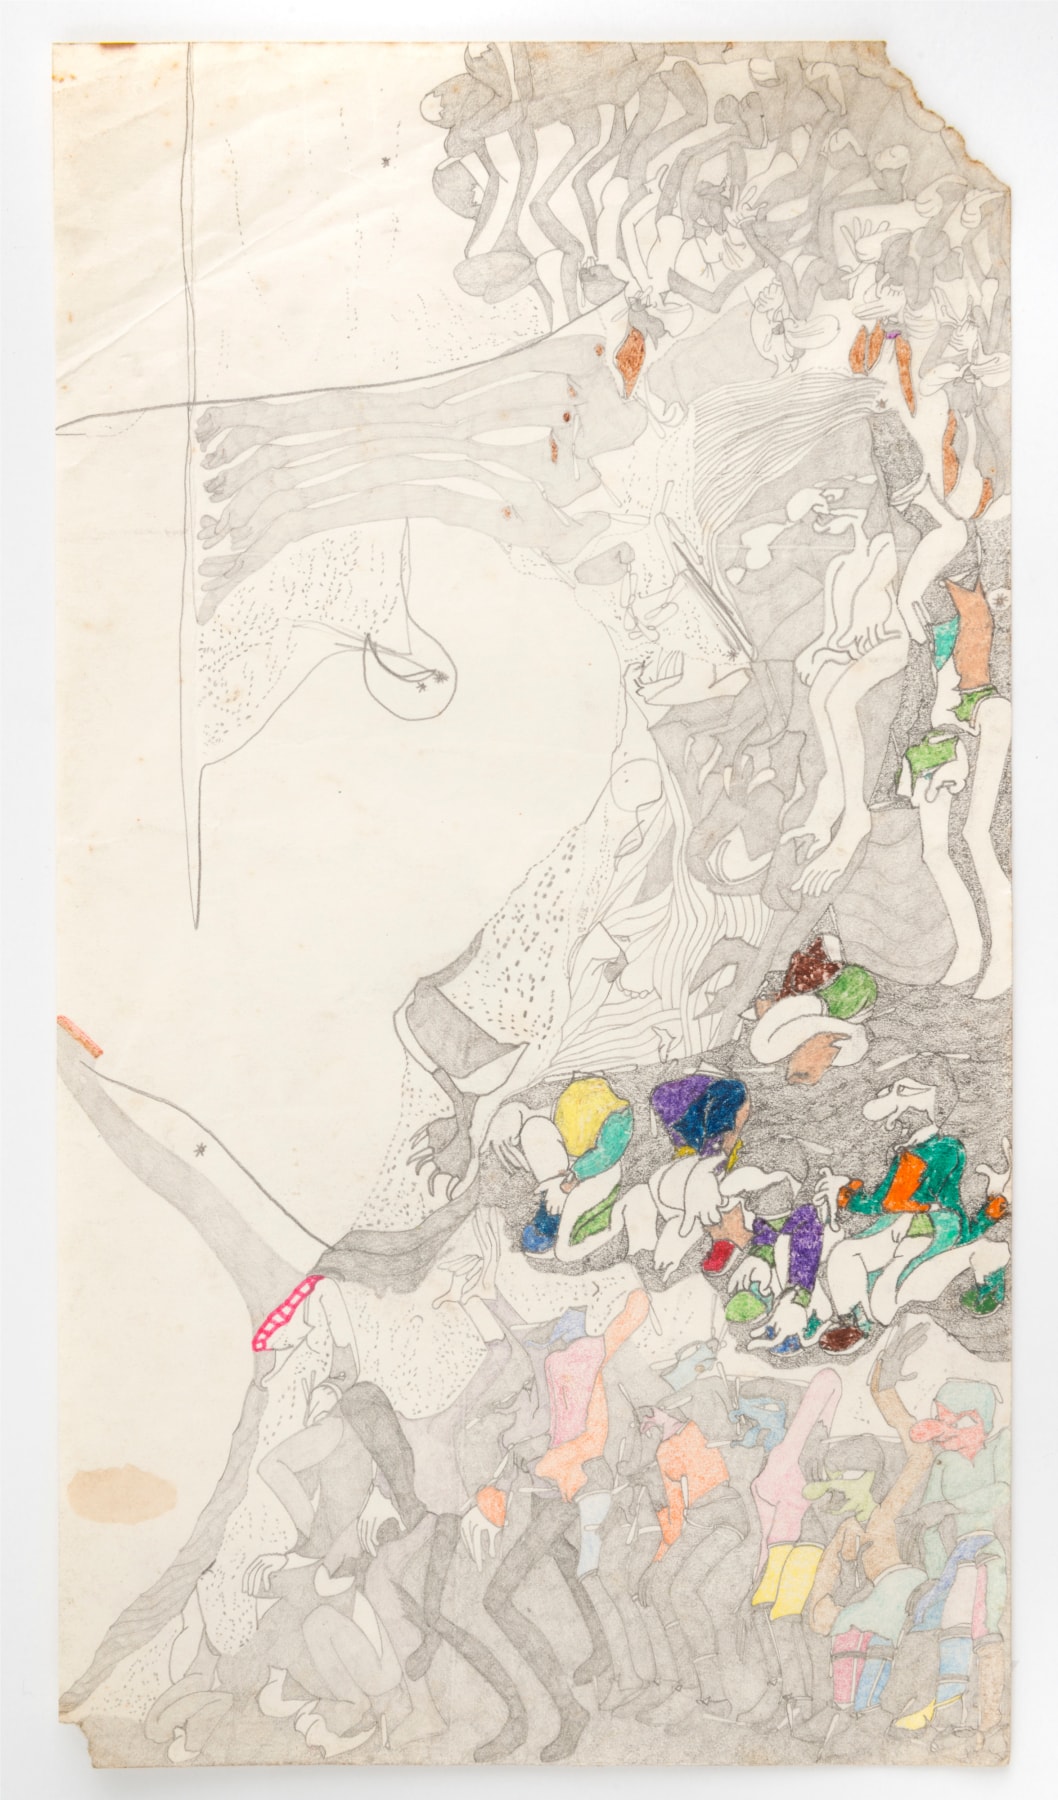 Susan Te Kahurangi King&nbsp;(1951) New Zealand, Untitled, c. 1975-1980, Graphite, colored pencil and crayon on paper, 16.5 x 9 in